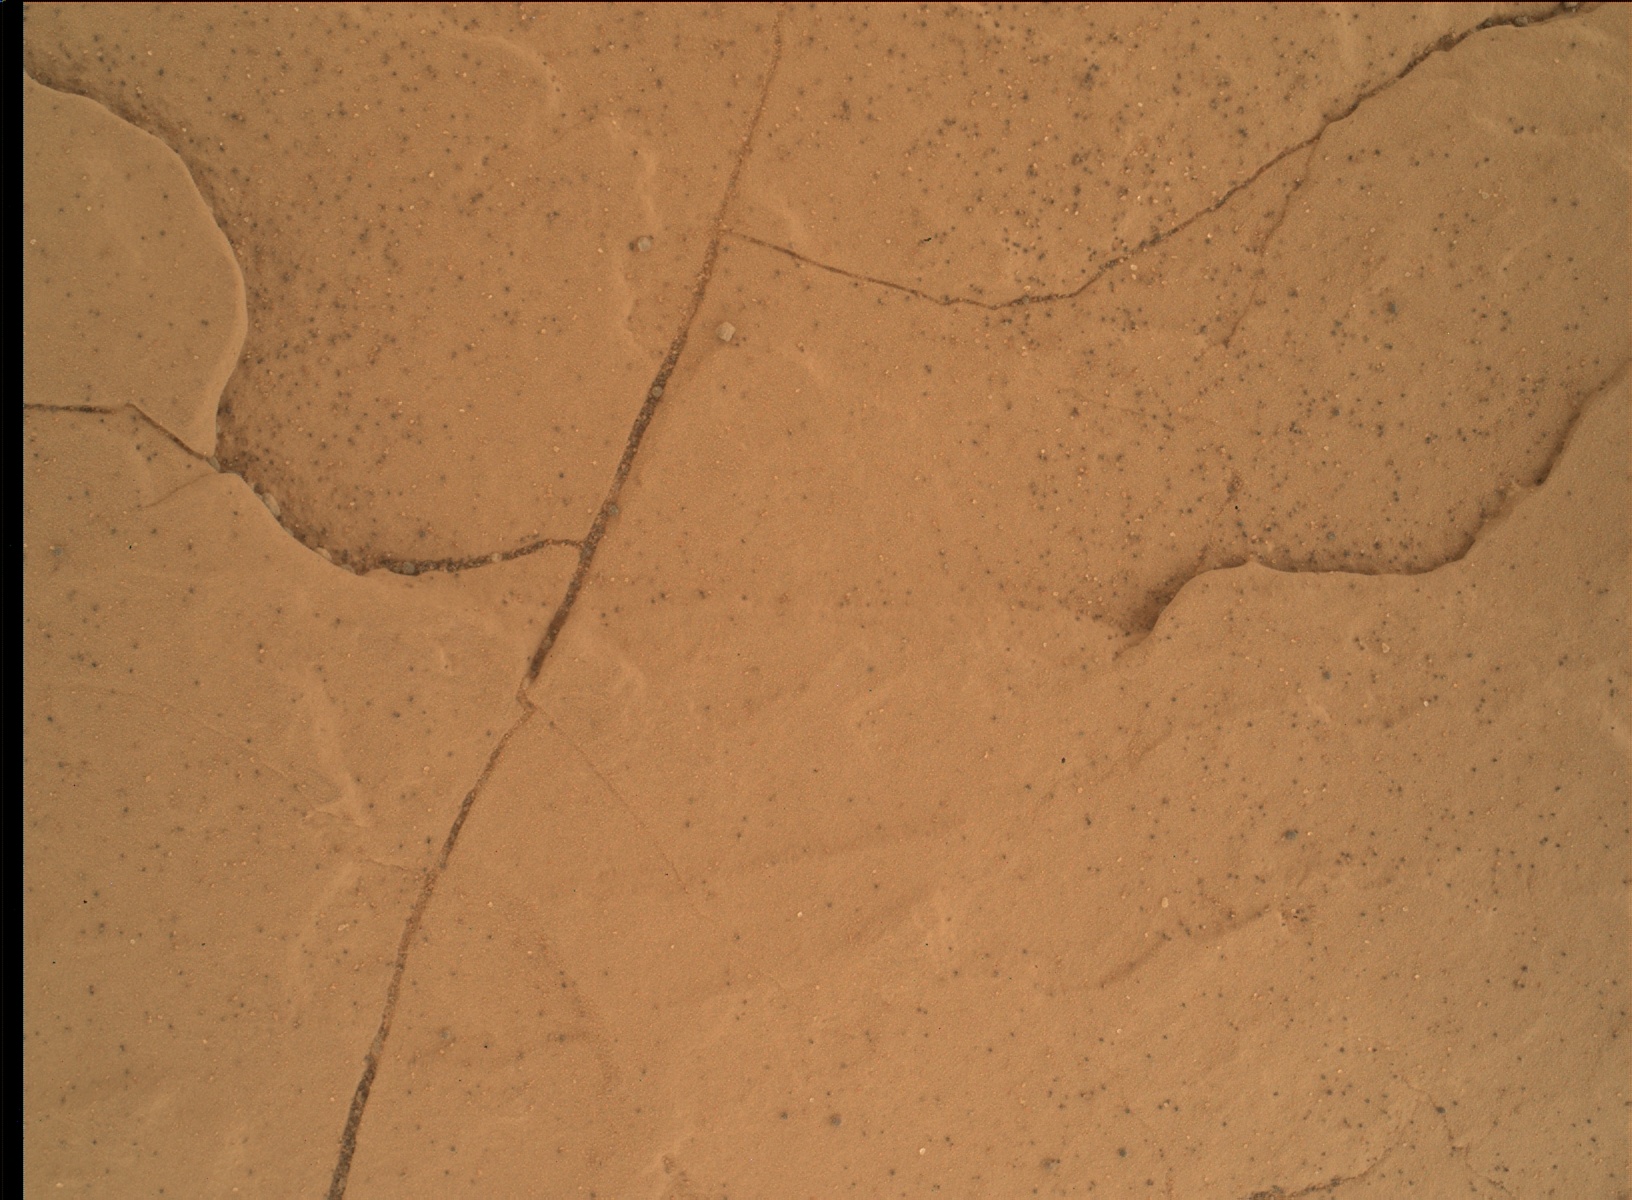 Nasa's Mars rover Curiosity acquired this image using its Mars Hand Lens Imager (MAHLI) on Sol 1719